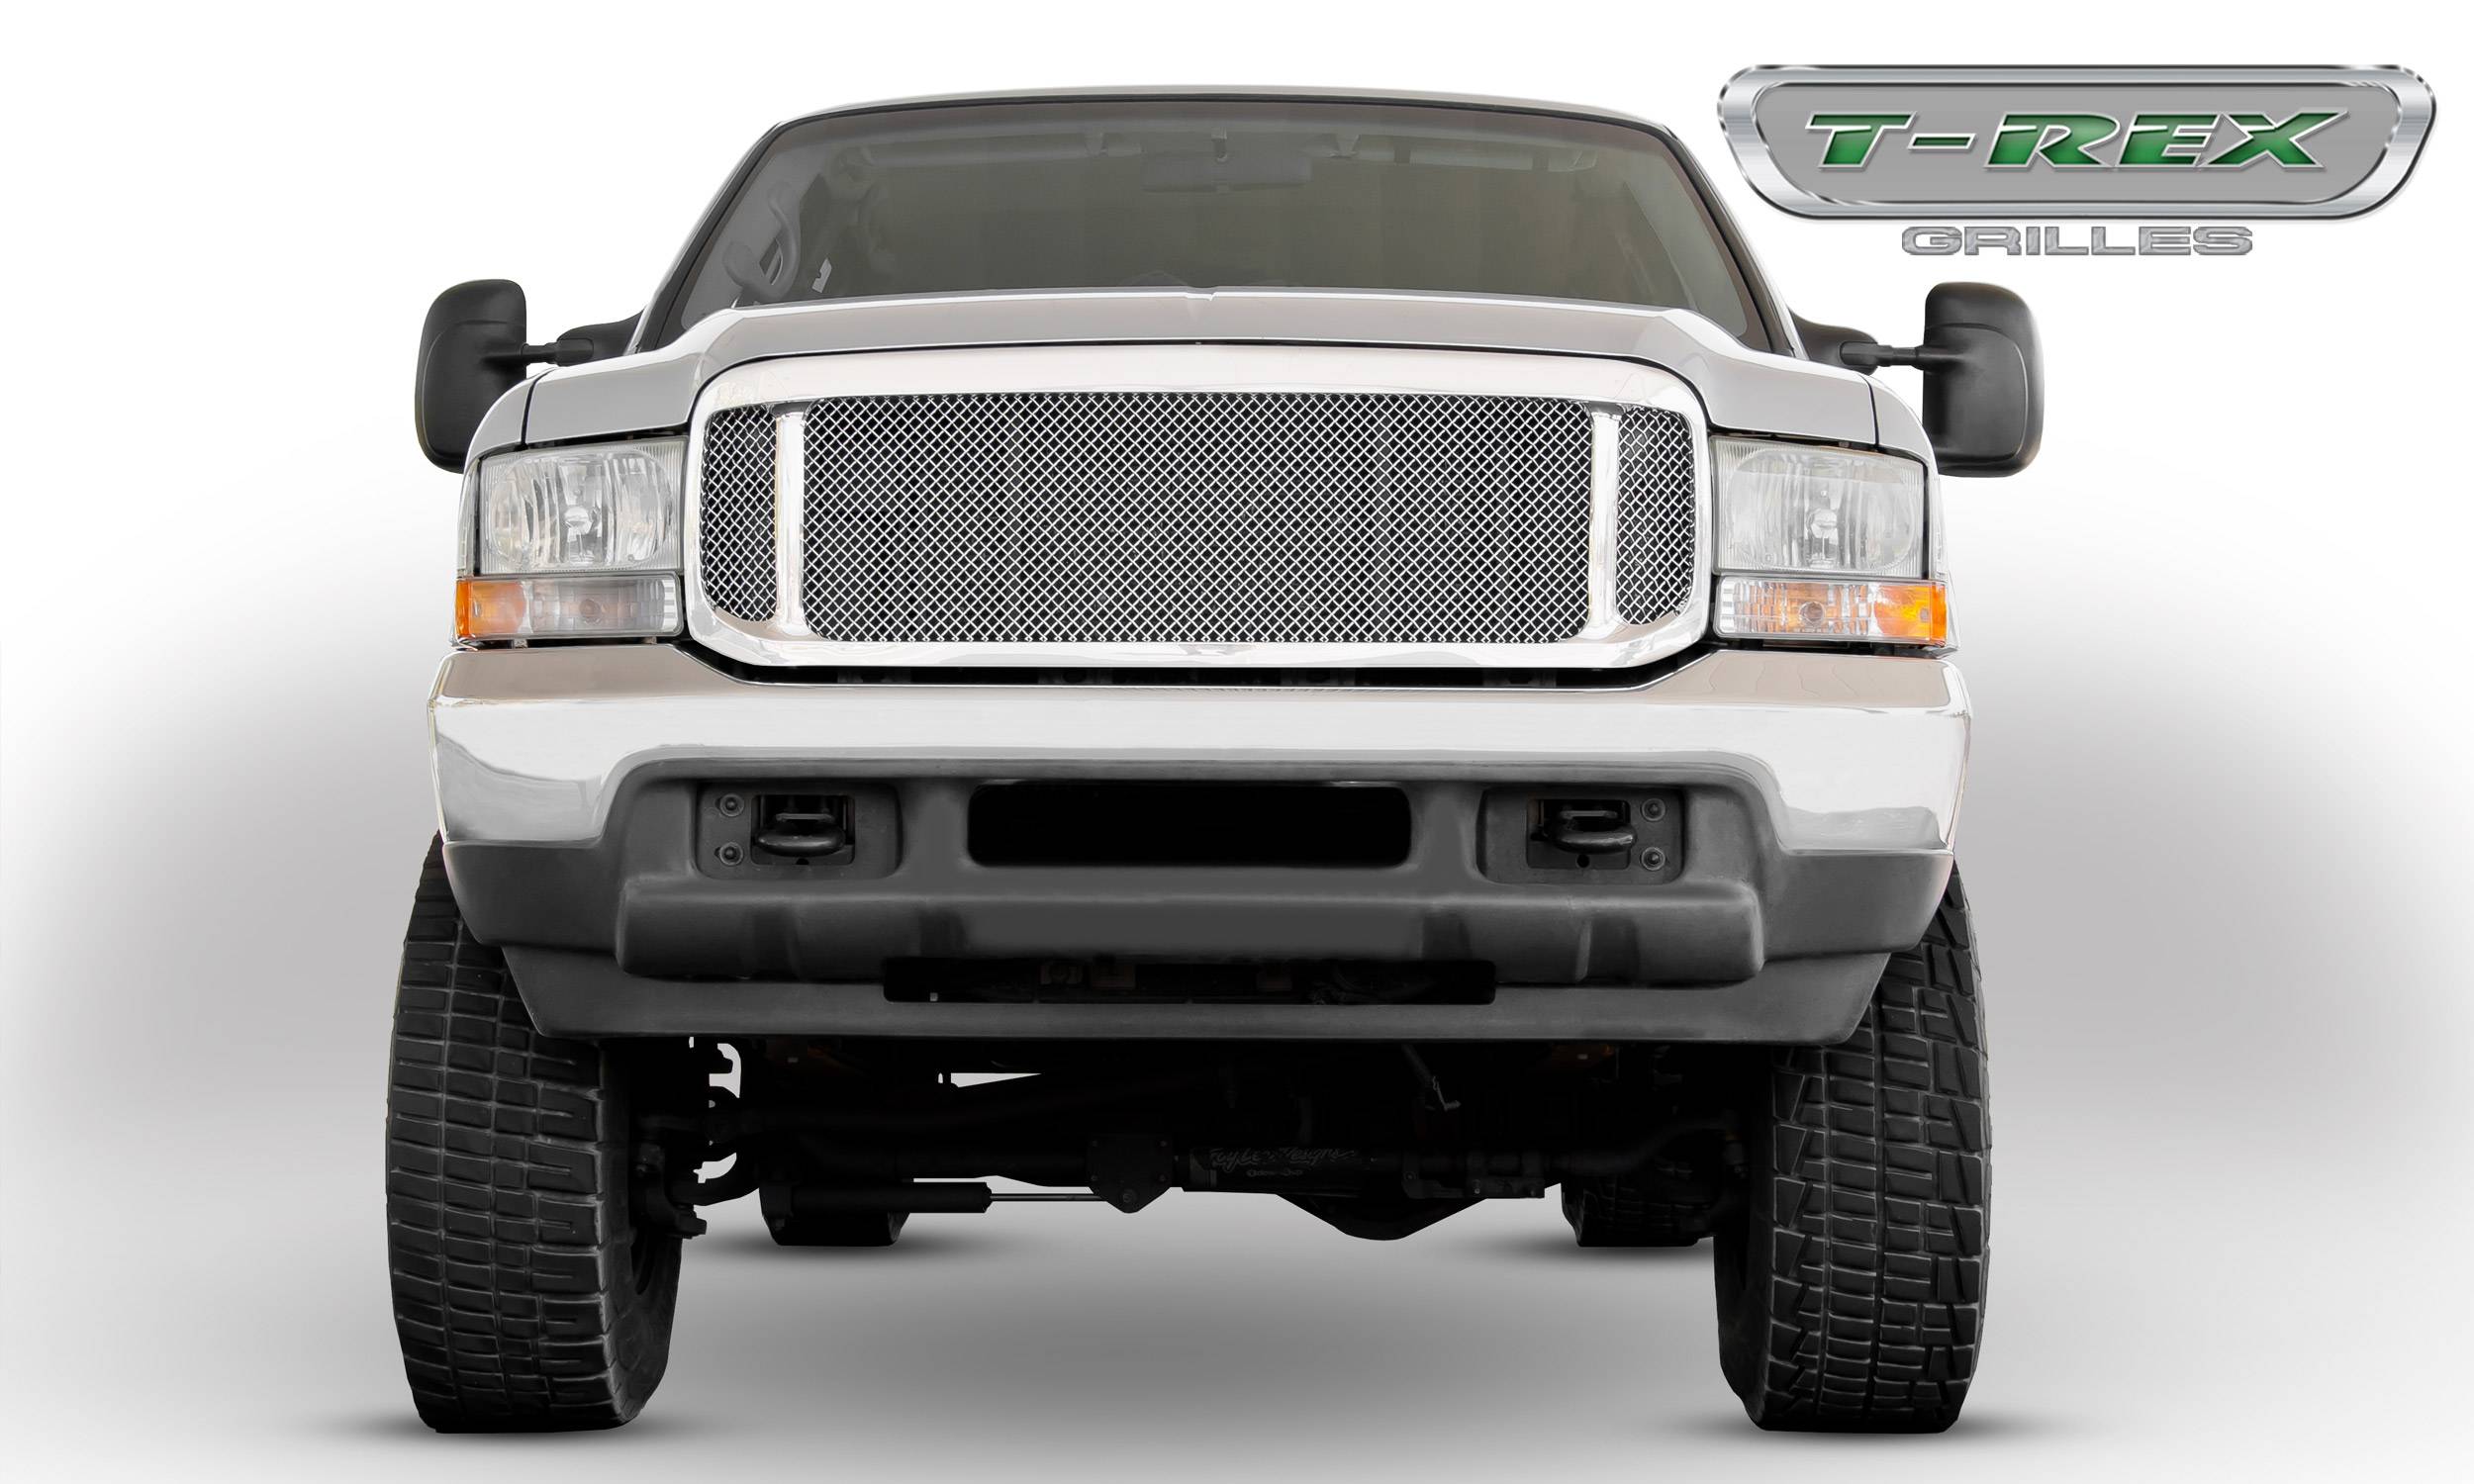 T-REX Grilles - 1999-2004 Excursion, Harley, 99-04 Super Duty Assembly Grille, Polished, 1 Pc, Replacement - Part # 50571